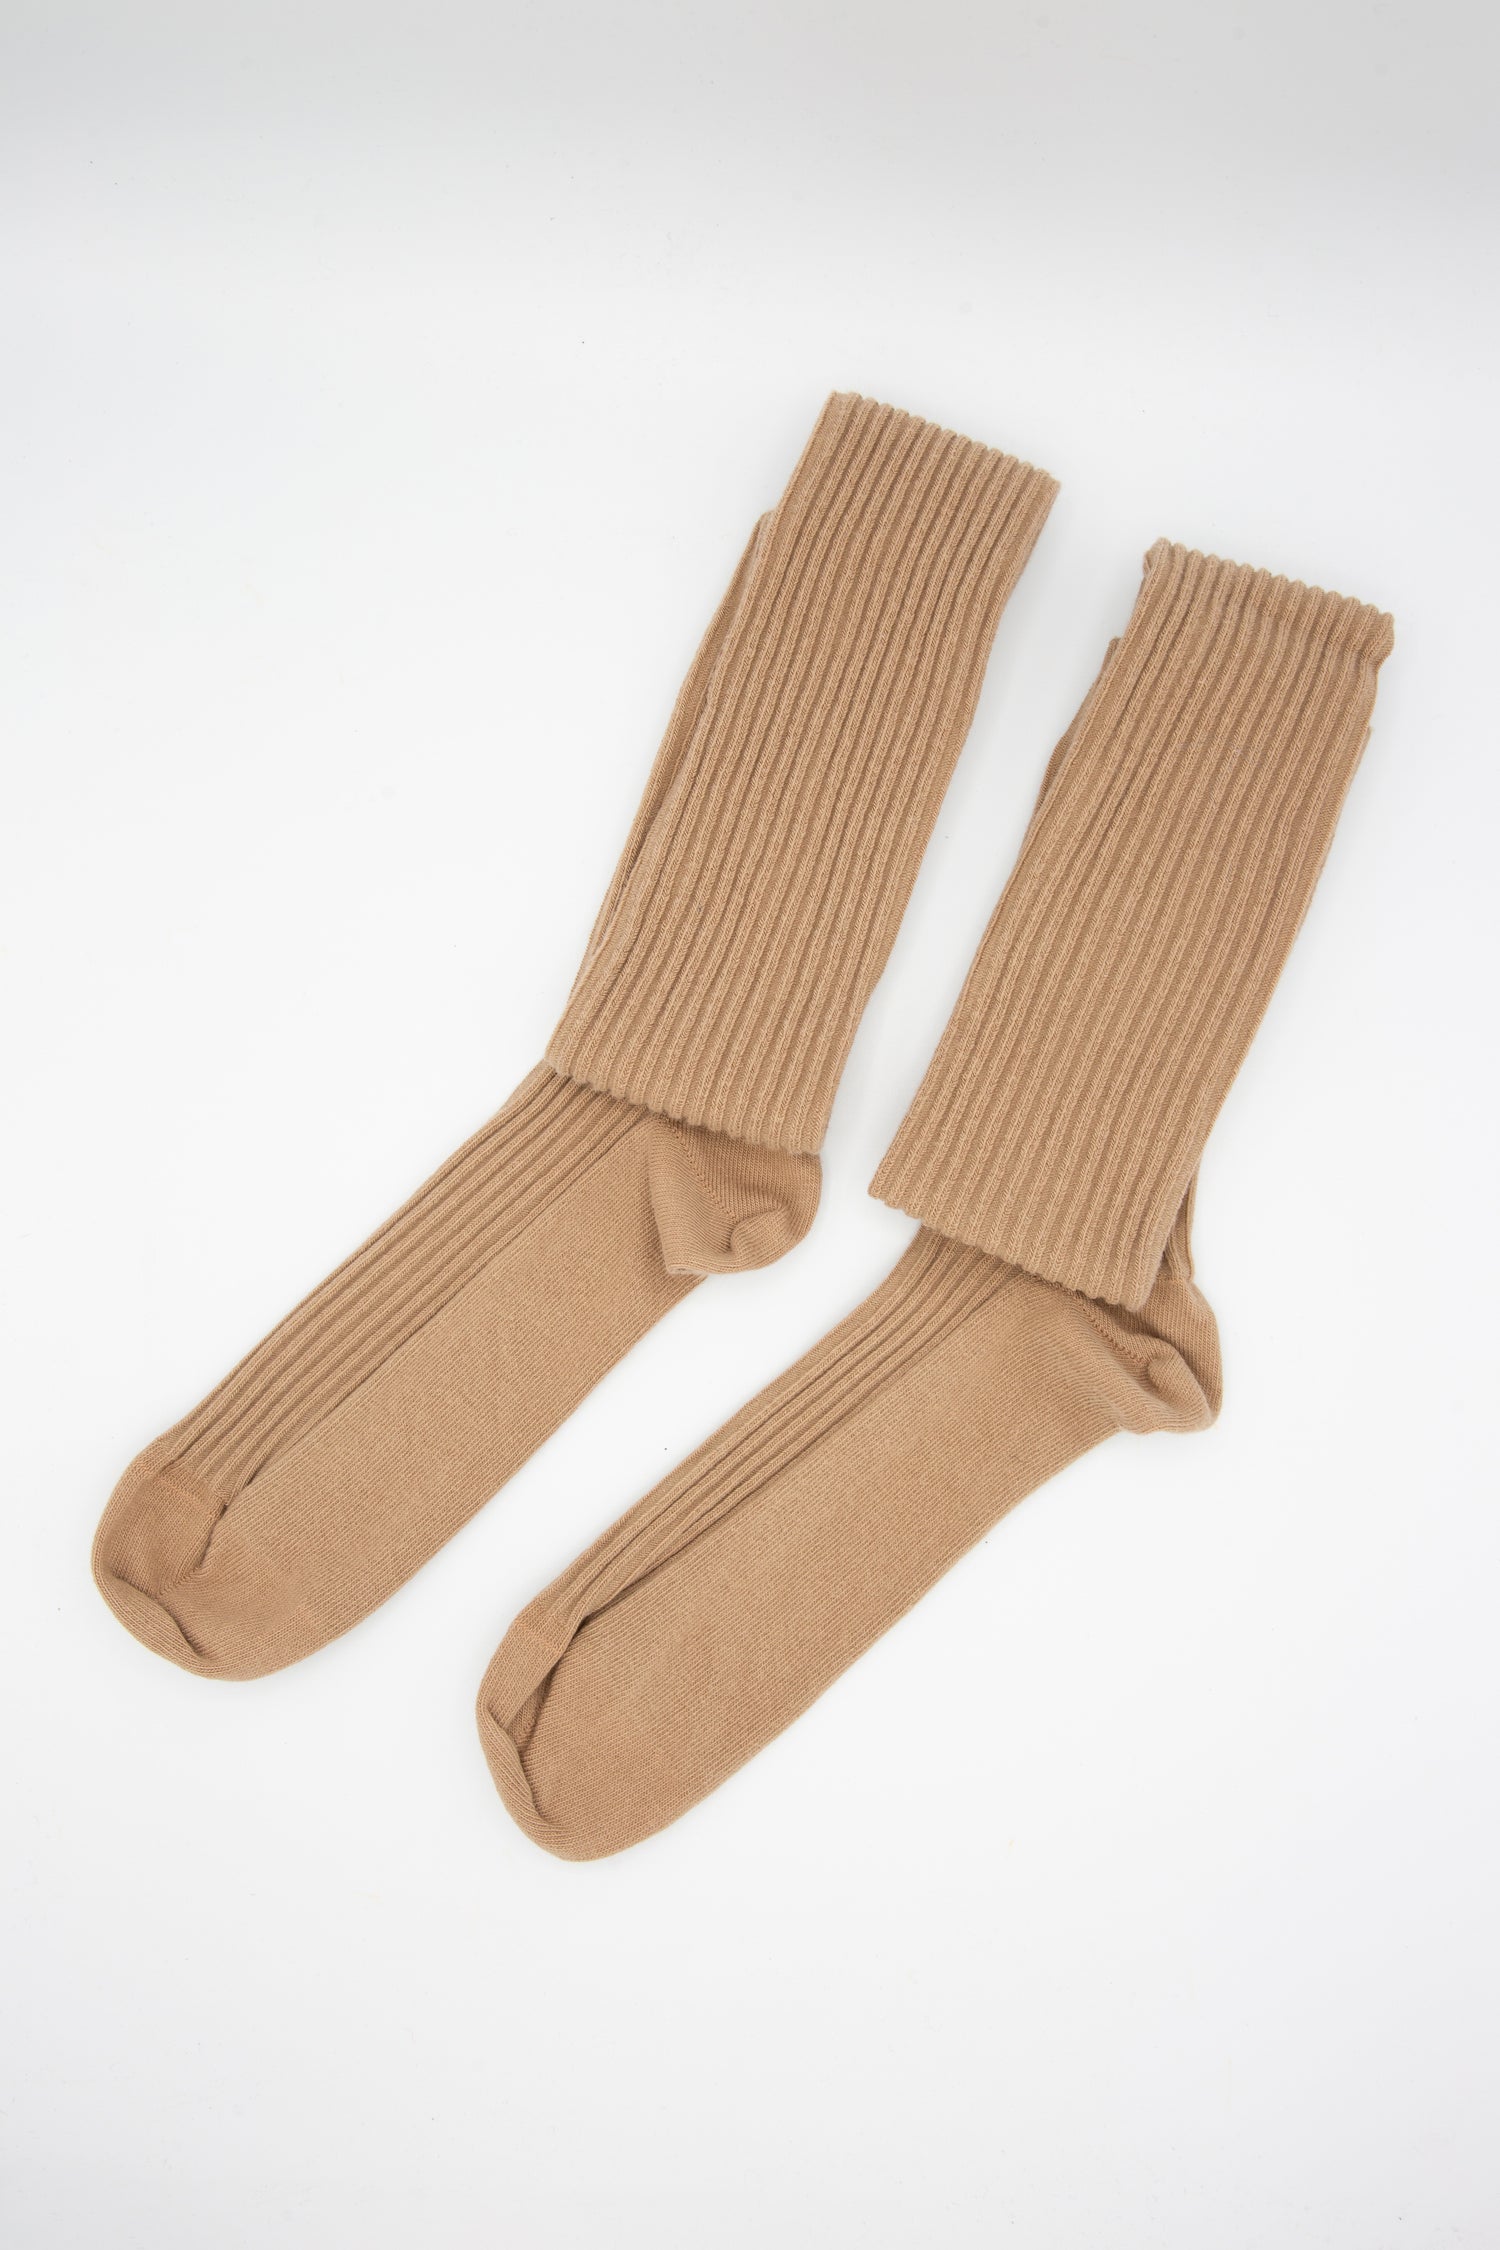 A pair of sustainably produced Baserange Overknee Socks in Brandy, made from an organic cotton blend, showcased on a white background.